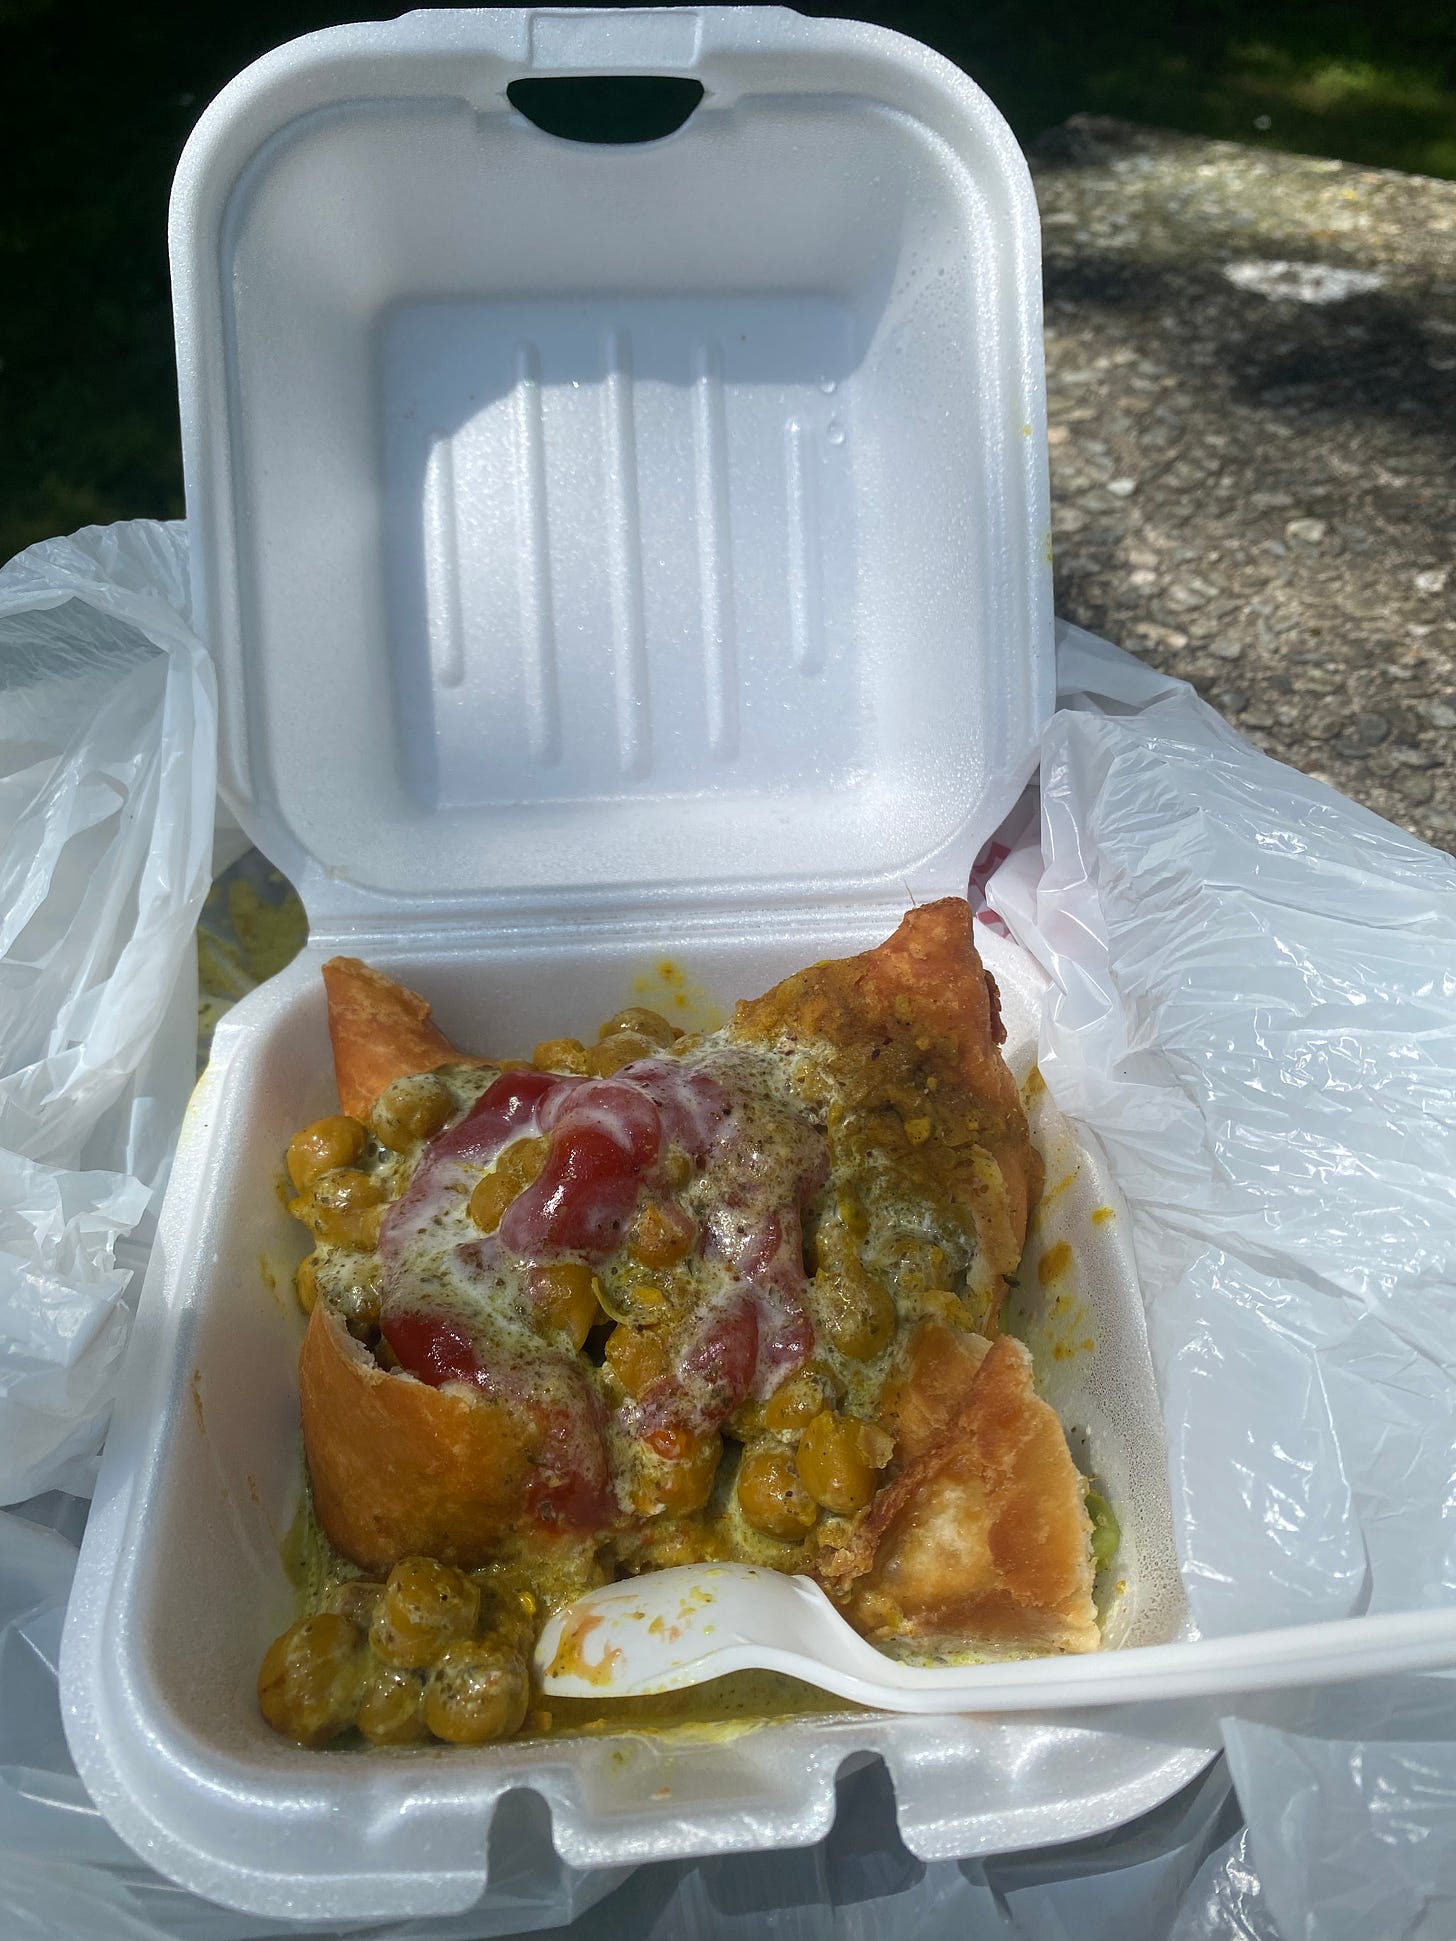 the samosa chaat described above: four corners of a samosa surrounded by chana curry and covered with ketchup and yogurt on top. It's in a small white takeout container with a plastic spoon sticking out of it.